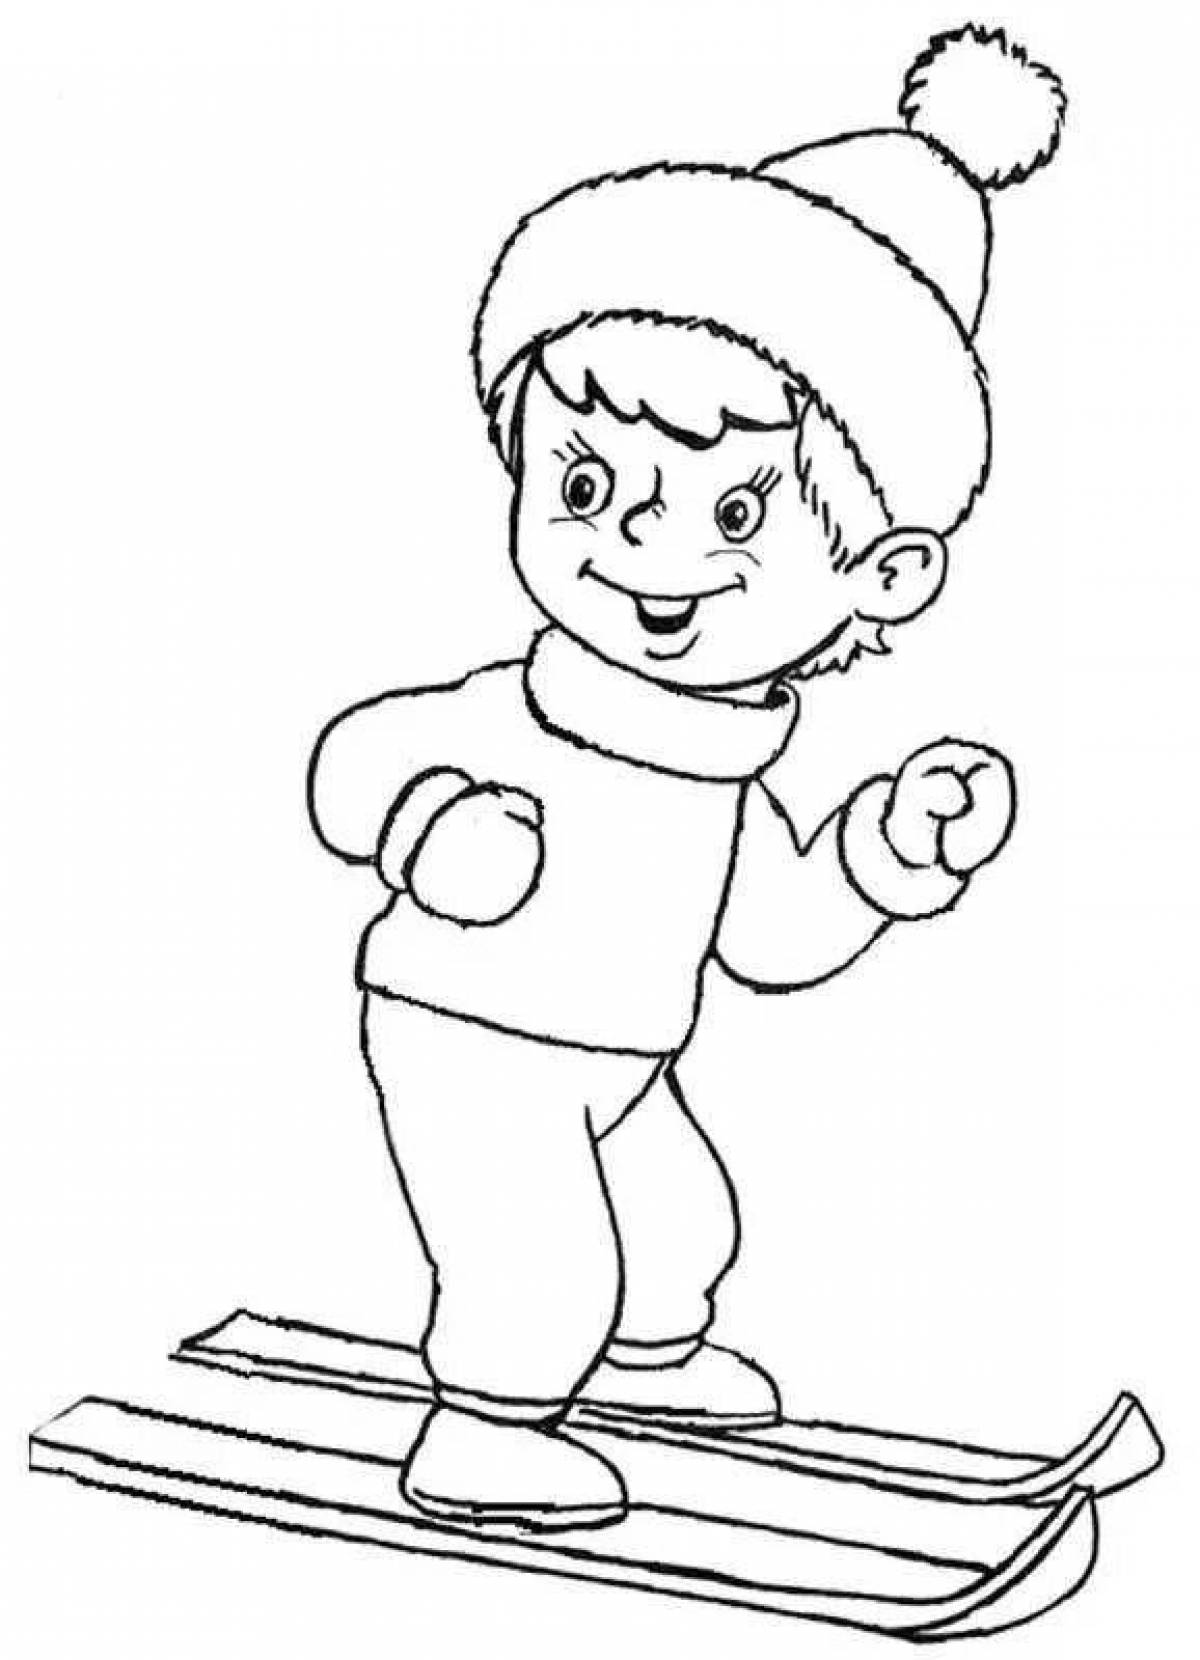 Children's glamor coloring book boy in winter clothes